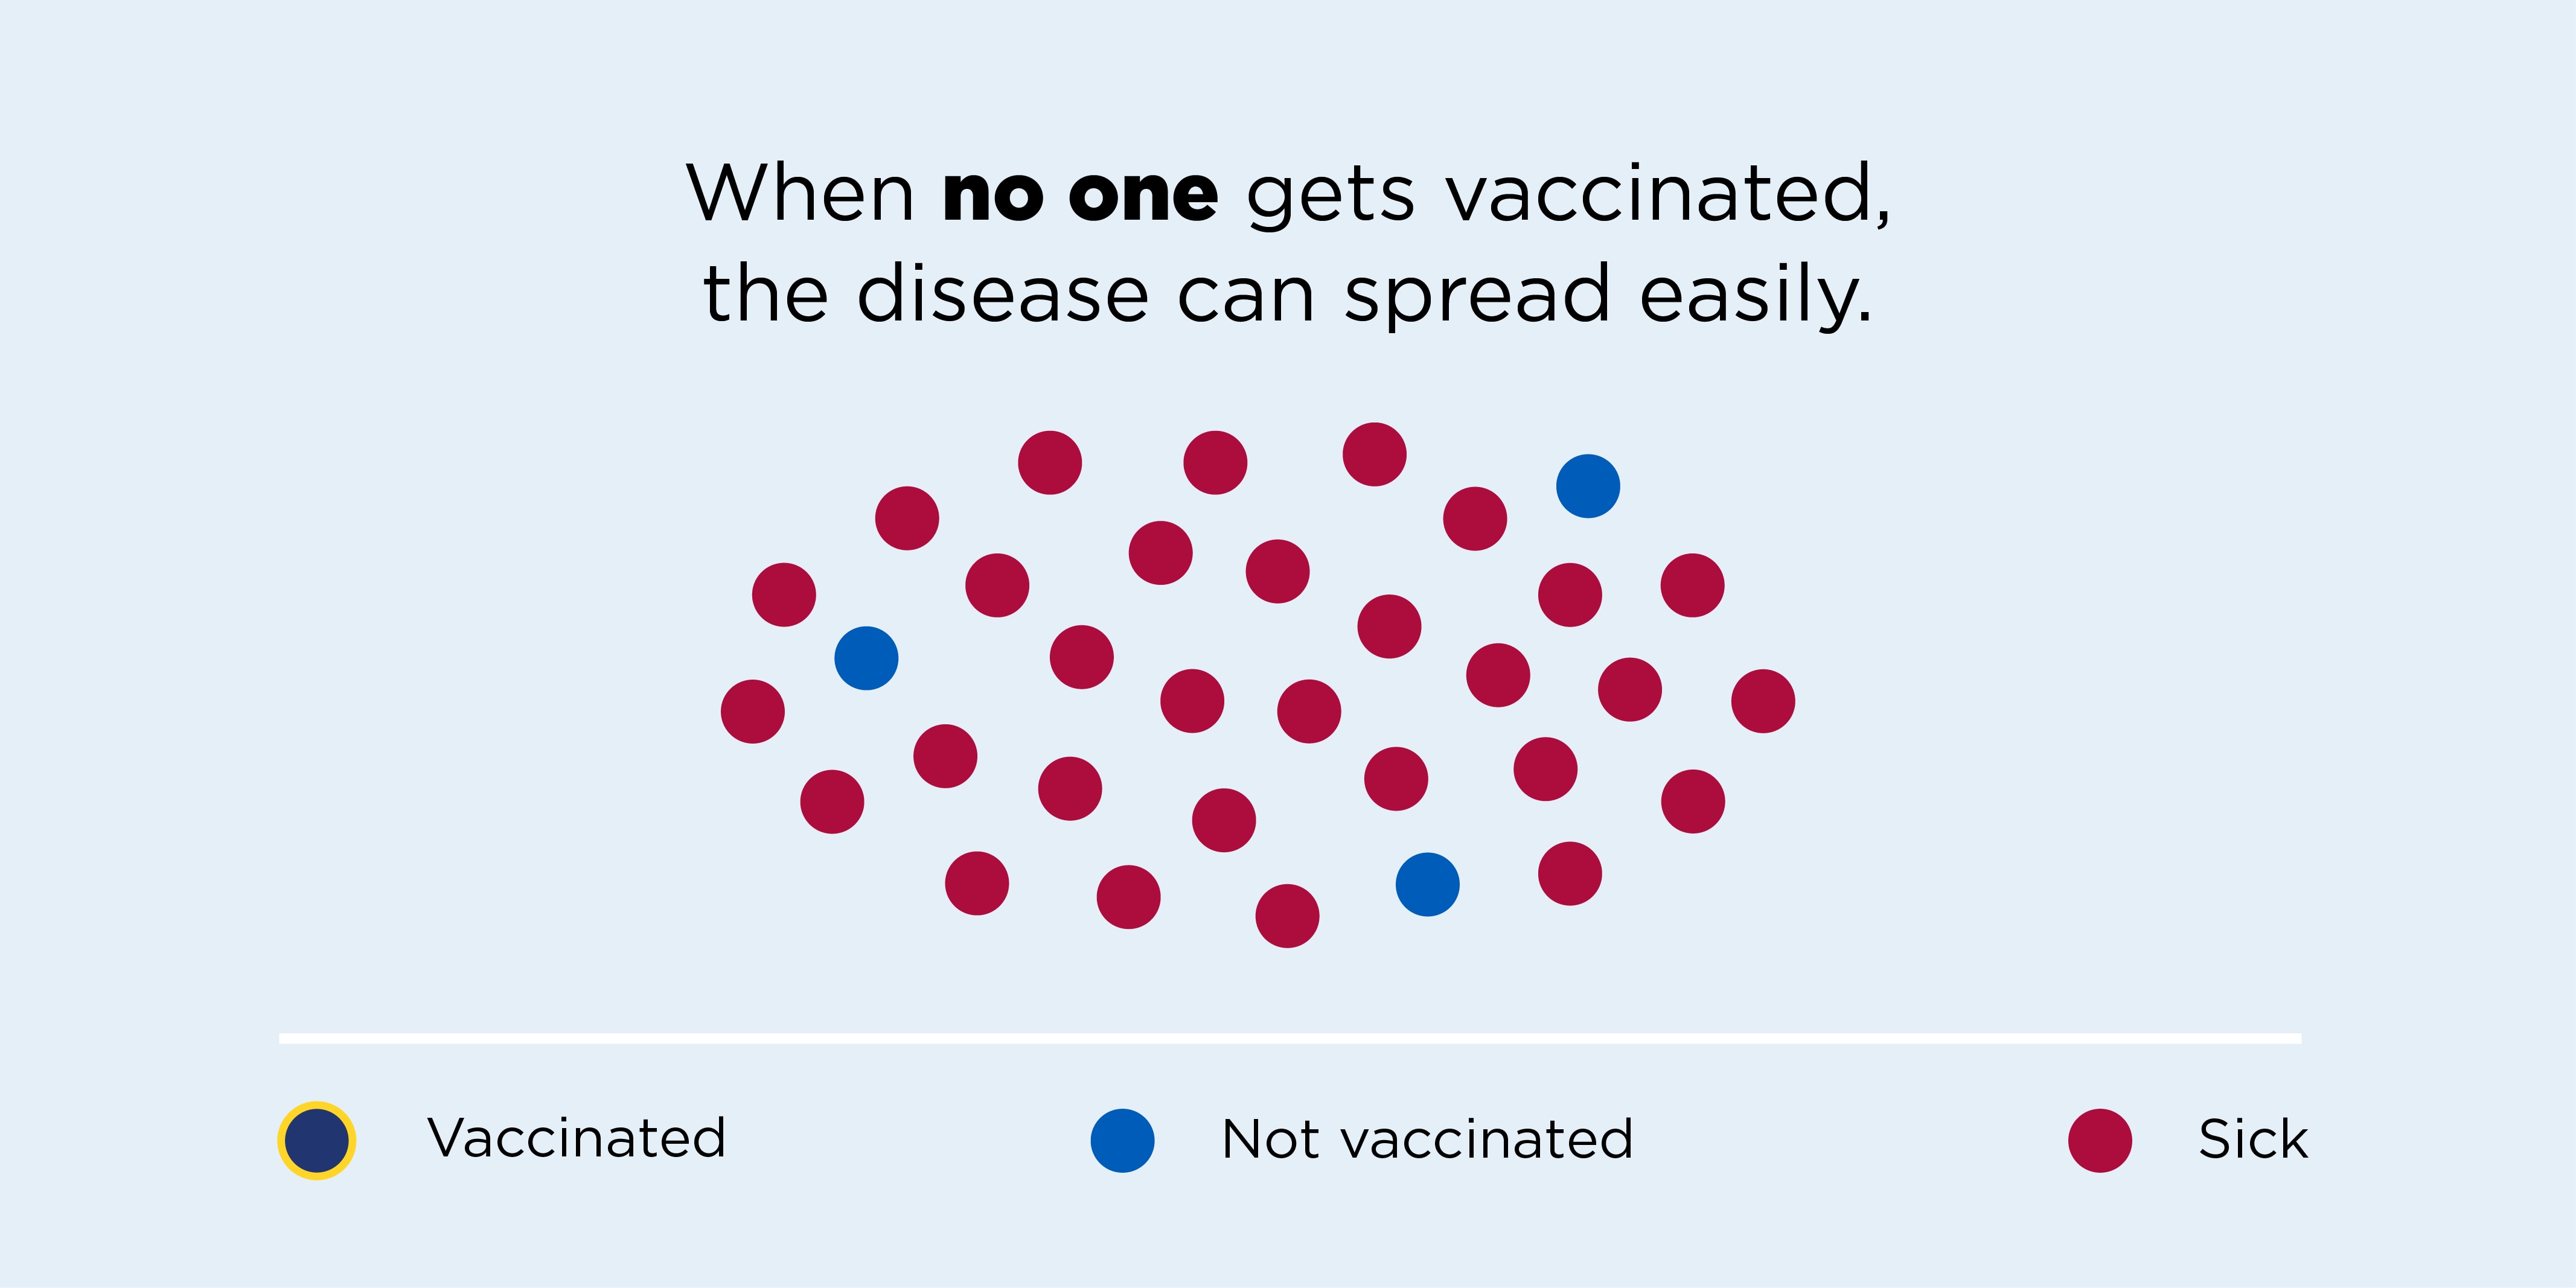 When no one gets vaccinated, the disease can spread easily. Dots of different colors represent those who are vaccinated, not vaccinated, and sick.